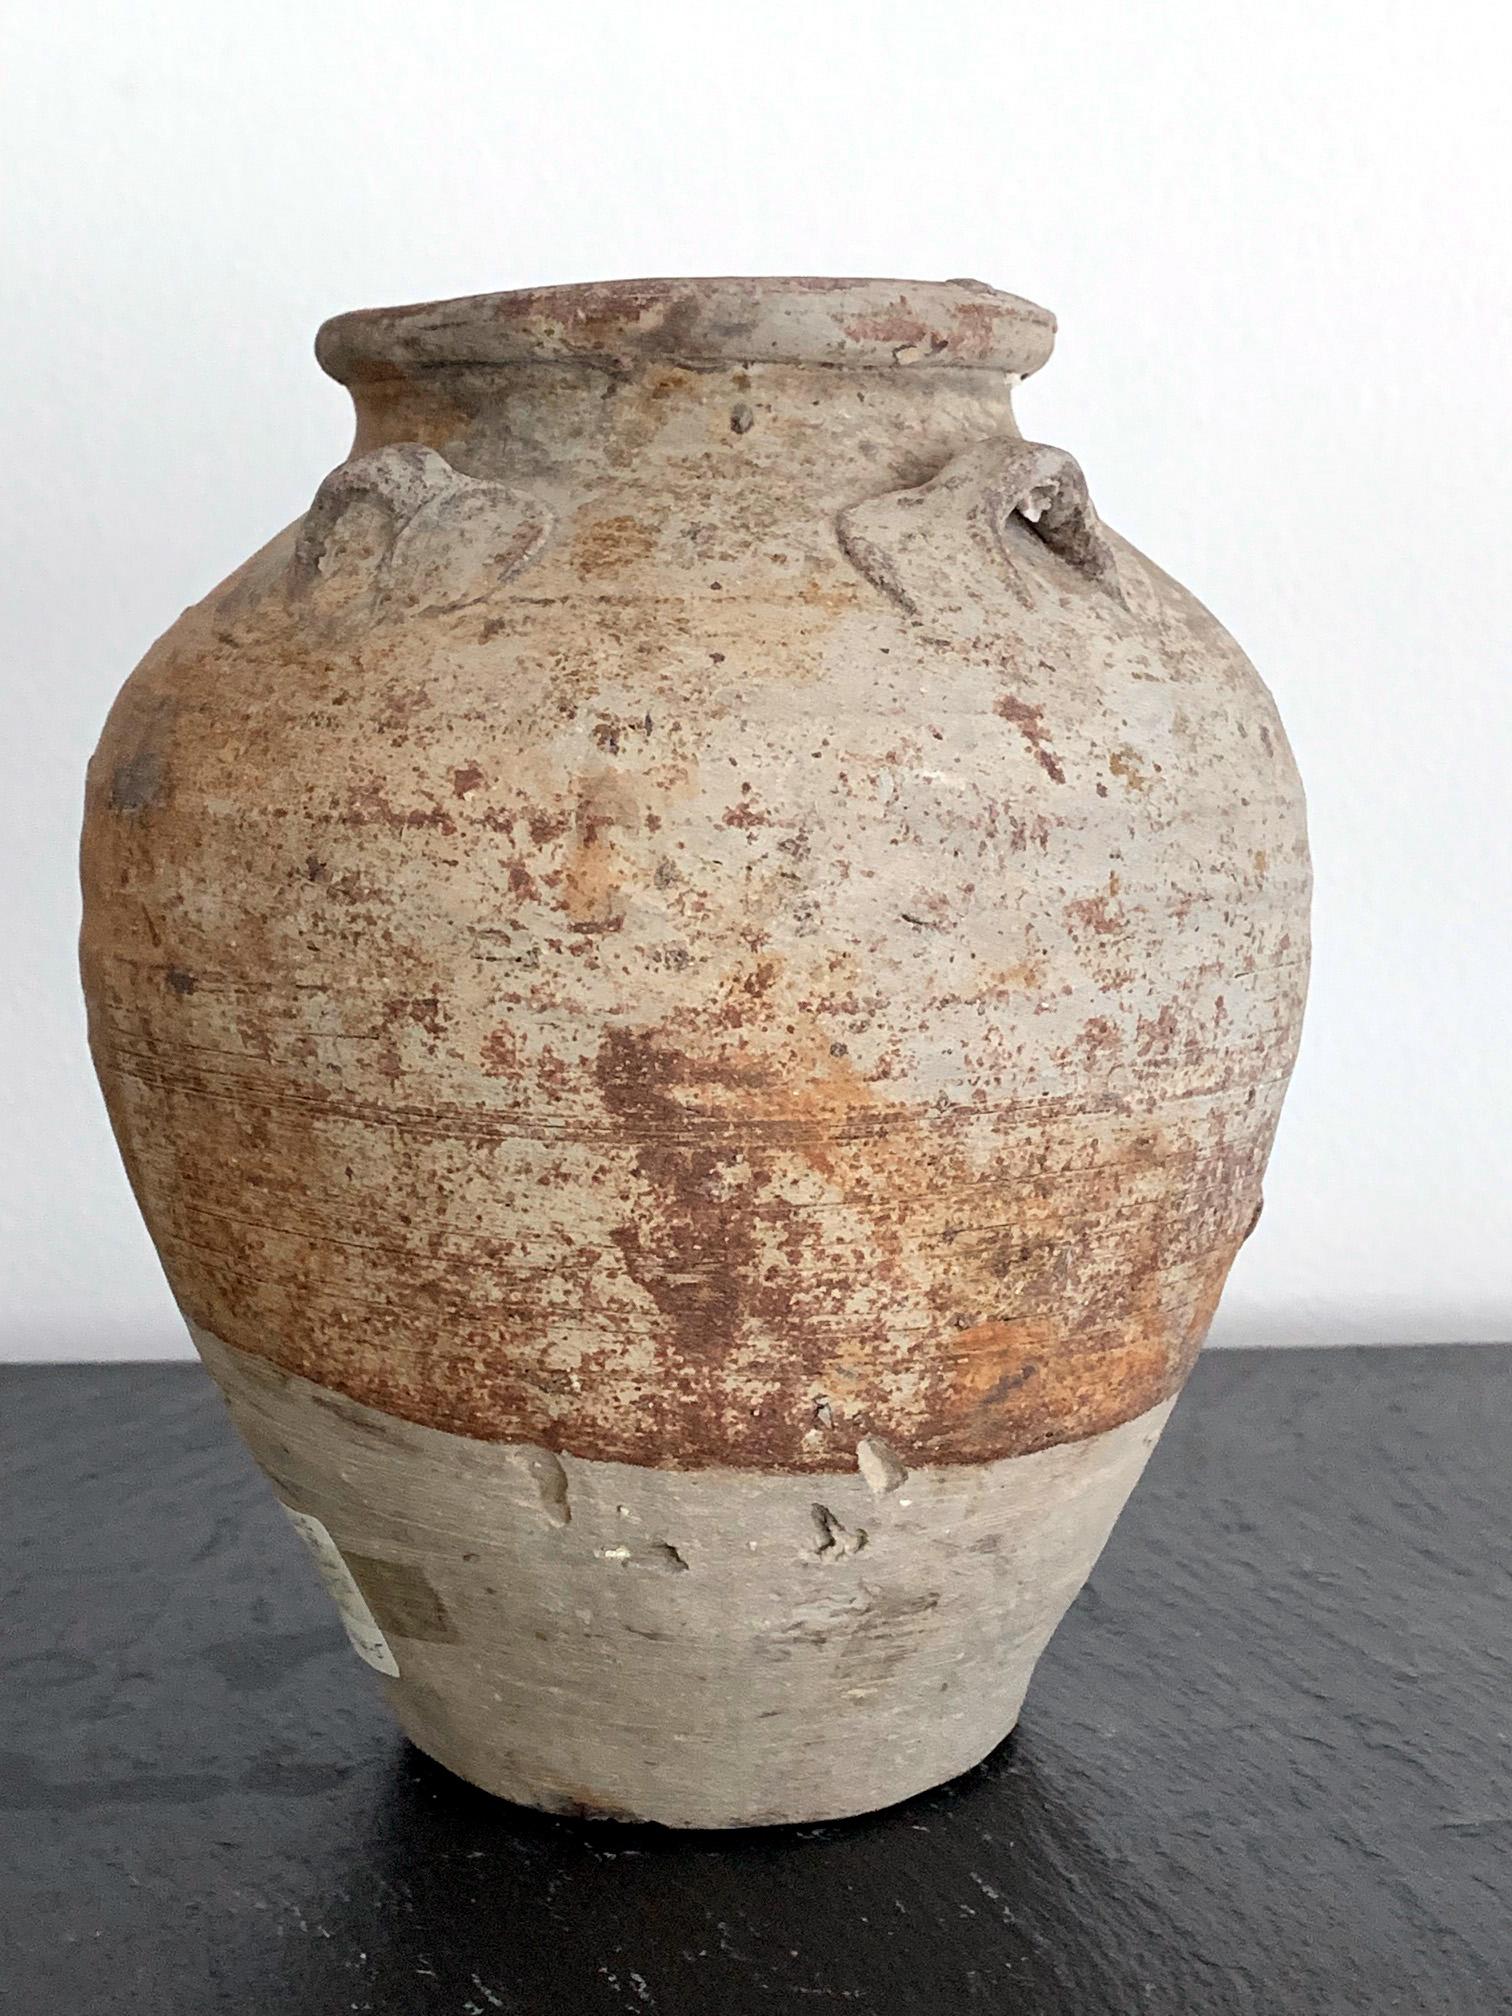 A stone ware pottery jar used for storage, made in southern China Fujian or Guangdong province since Song Dynasty for domestic use as well as export. They were widely exported to South East Asia and further, and sometimes known as Martaban Jars due